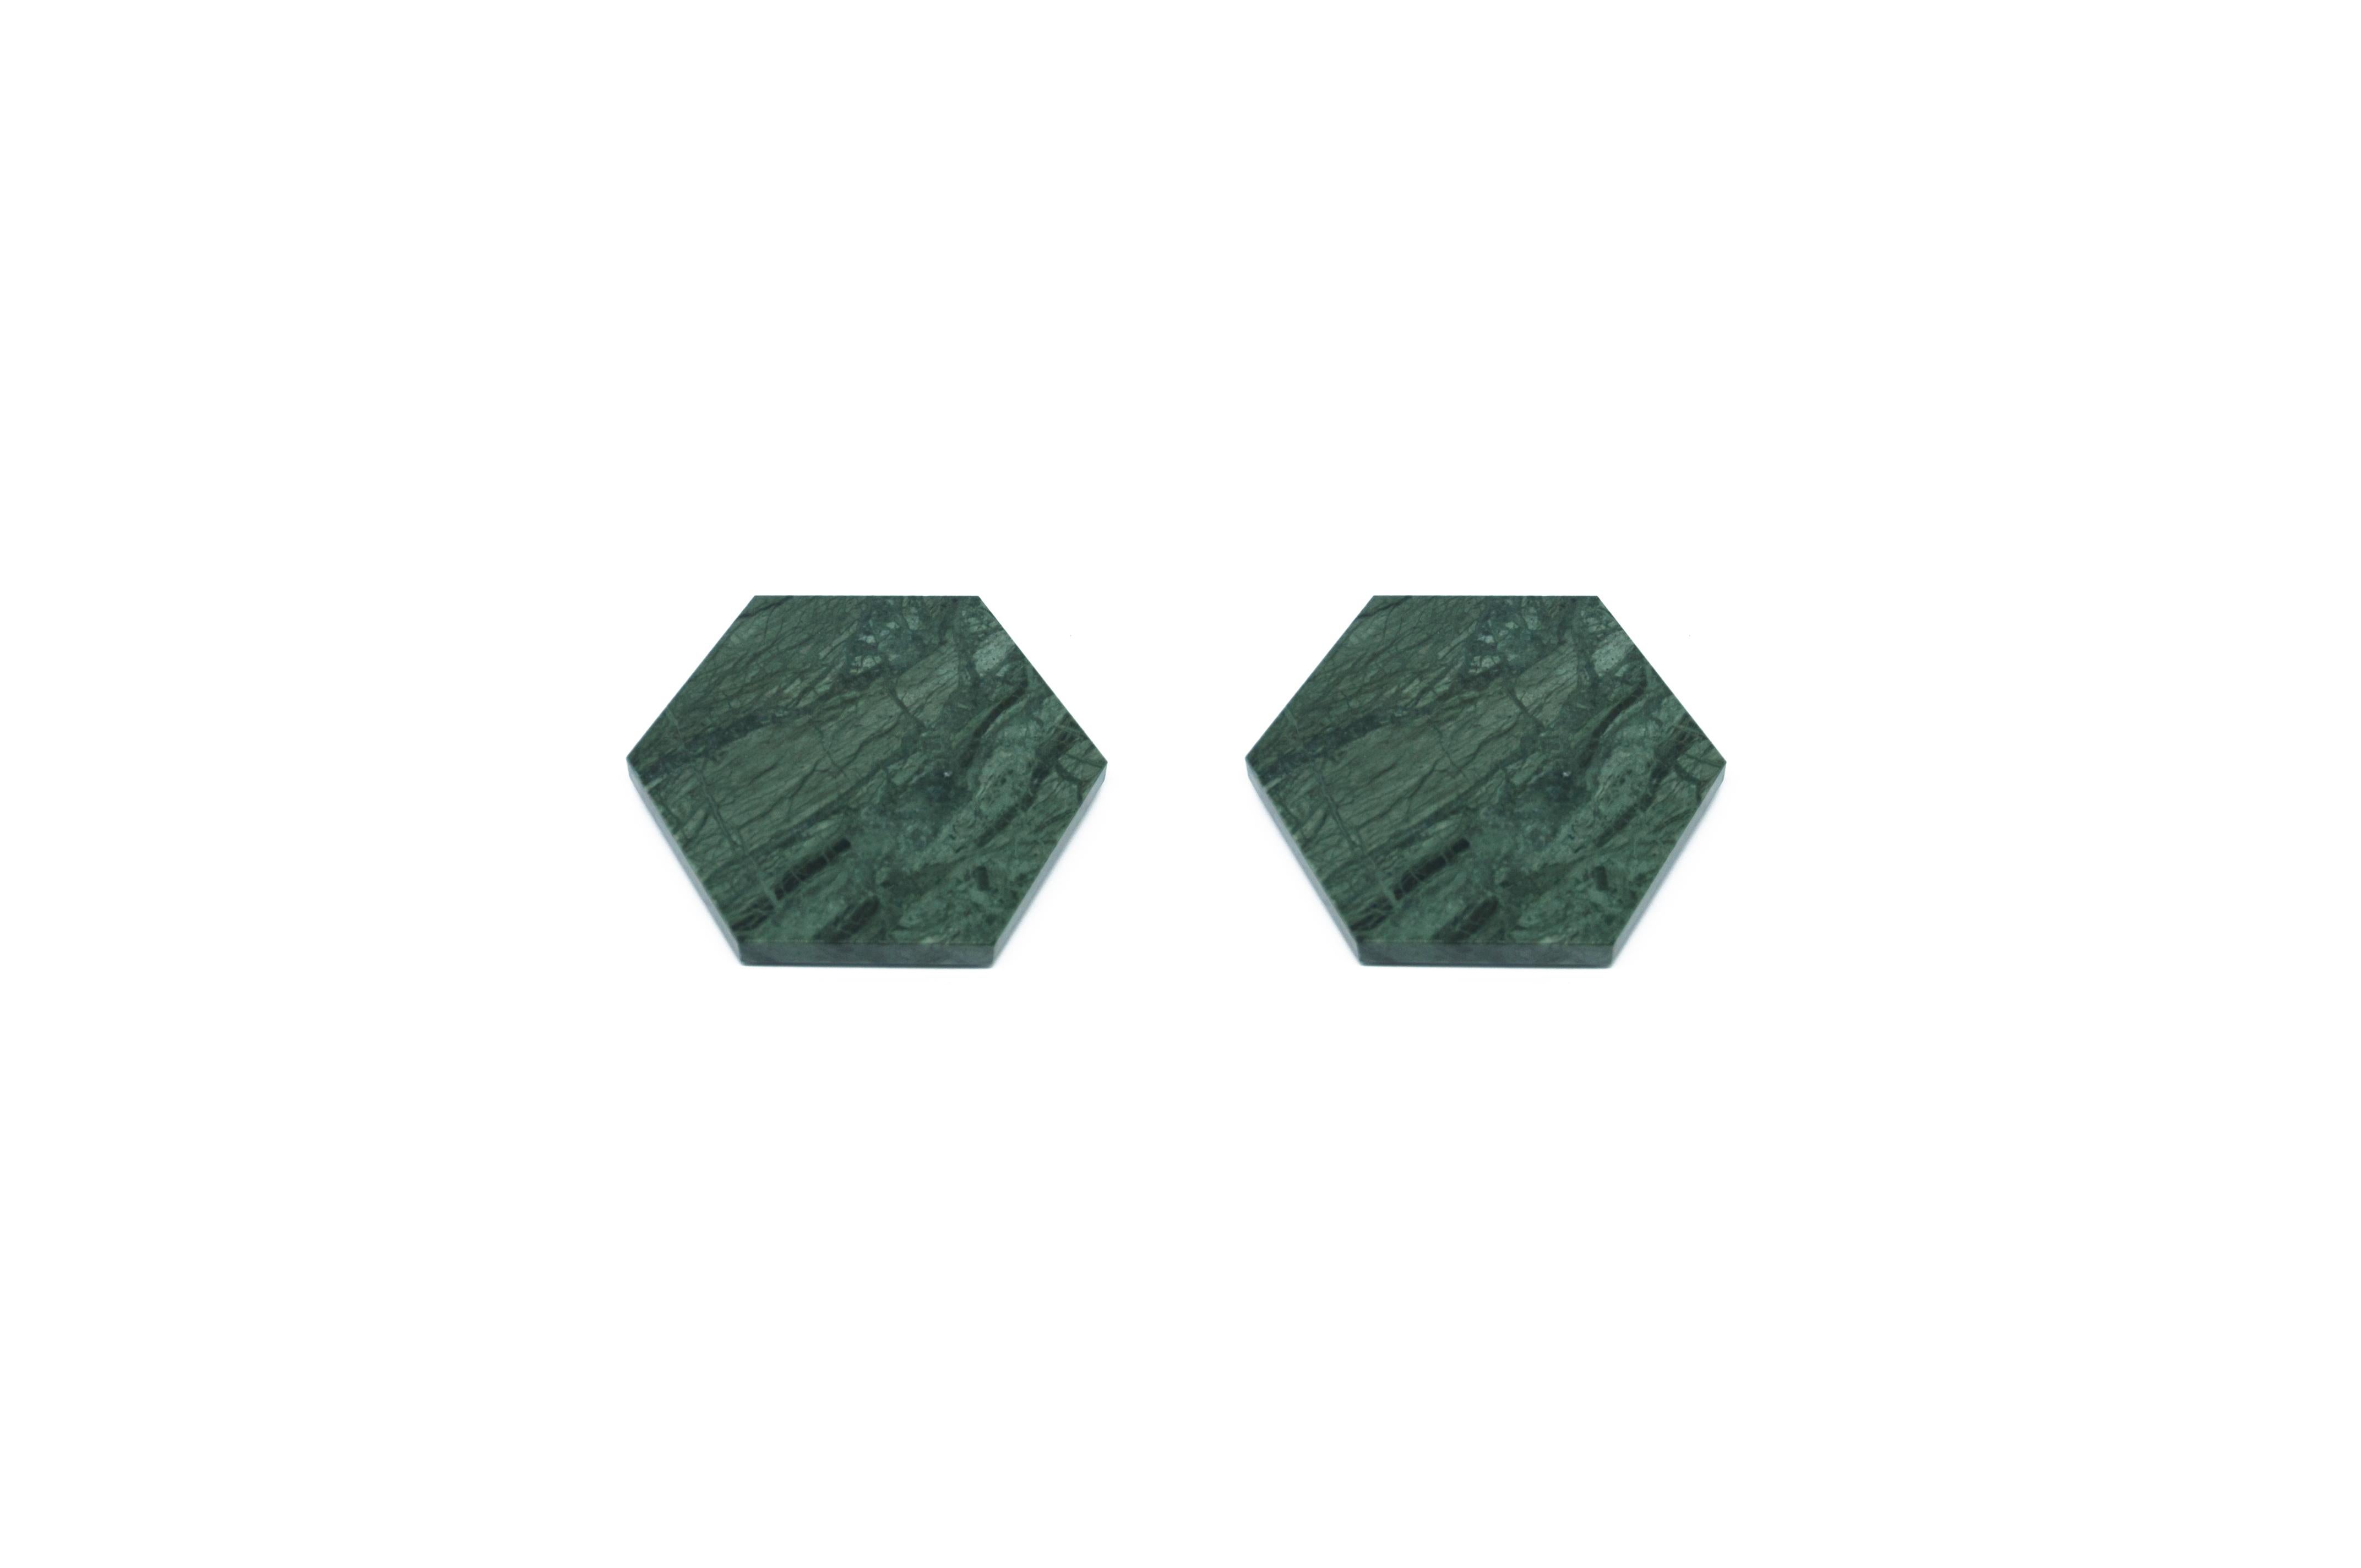 Set of 2 hexagonal shape green Guatemala marble coasters with cork underneath. Each piece is in a way unique (every marble block is different in veins and shades) and handmade by Italian artisans specialized over generations in processing marble.